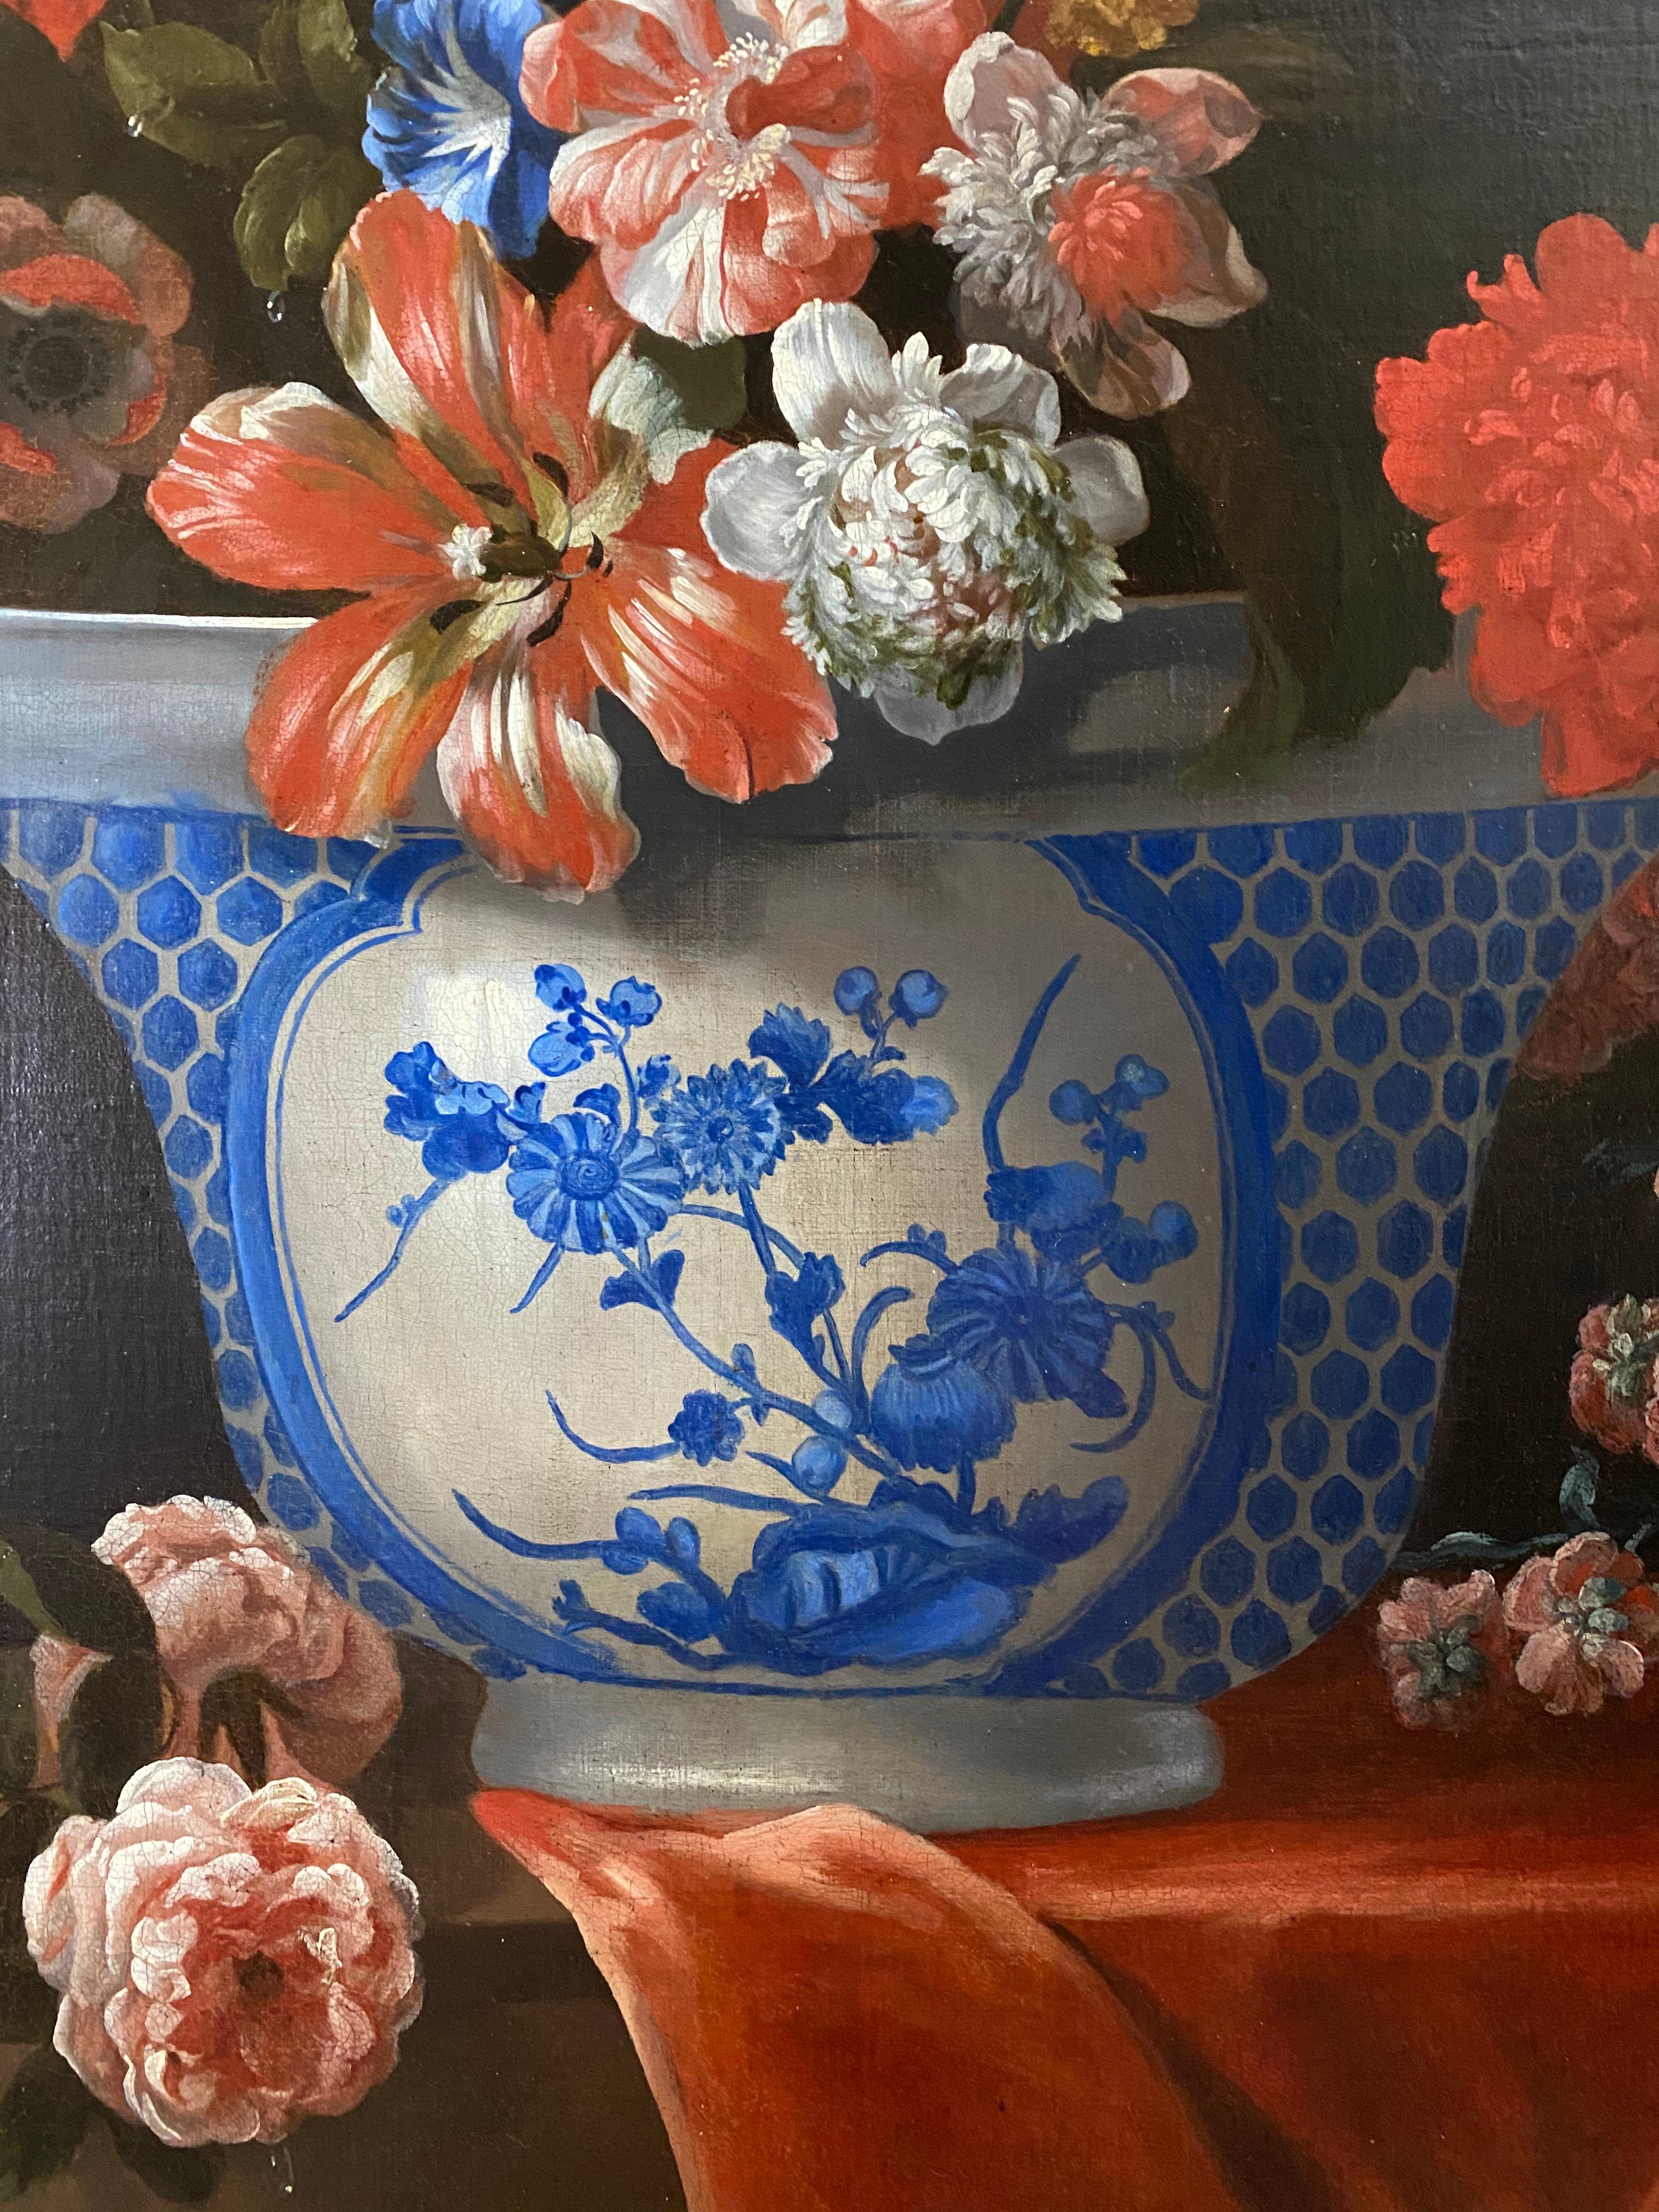 EARLY 18TH CENTURY DUTCH FLORAL STILL LIFE - ATTRIBUTED TO PIETER CASTEELS III (1684-1749)

Fine, monumental and highly decorative early 18th century Dutch floral still life attributed to Pieter Casteels (1684–1749)  
A collection of intensely